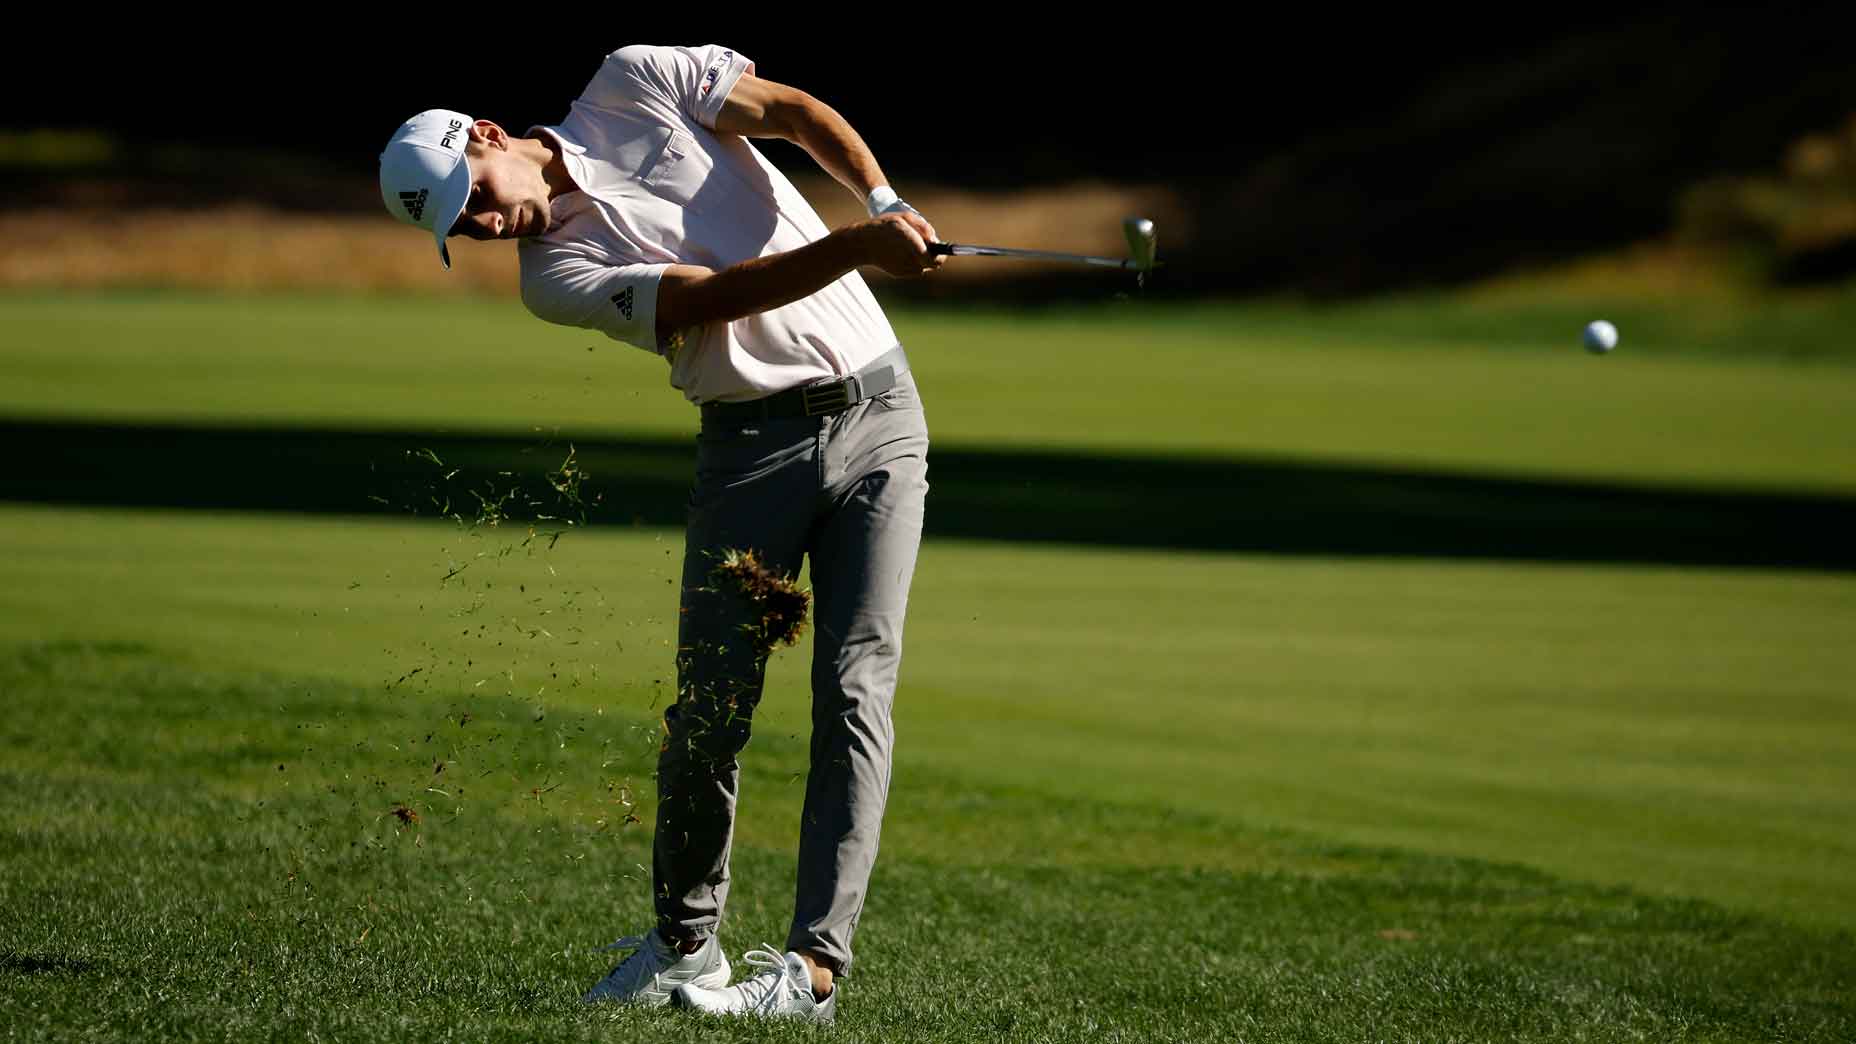 Riviera is being torched by an unconventional swing. Here's why it works